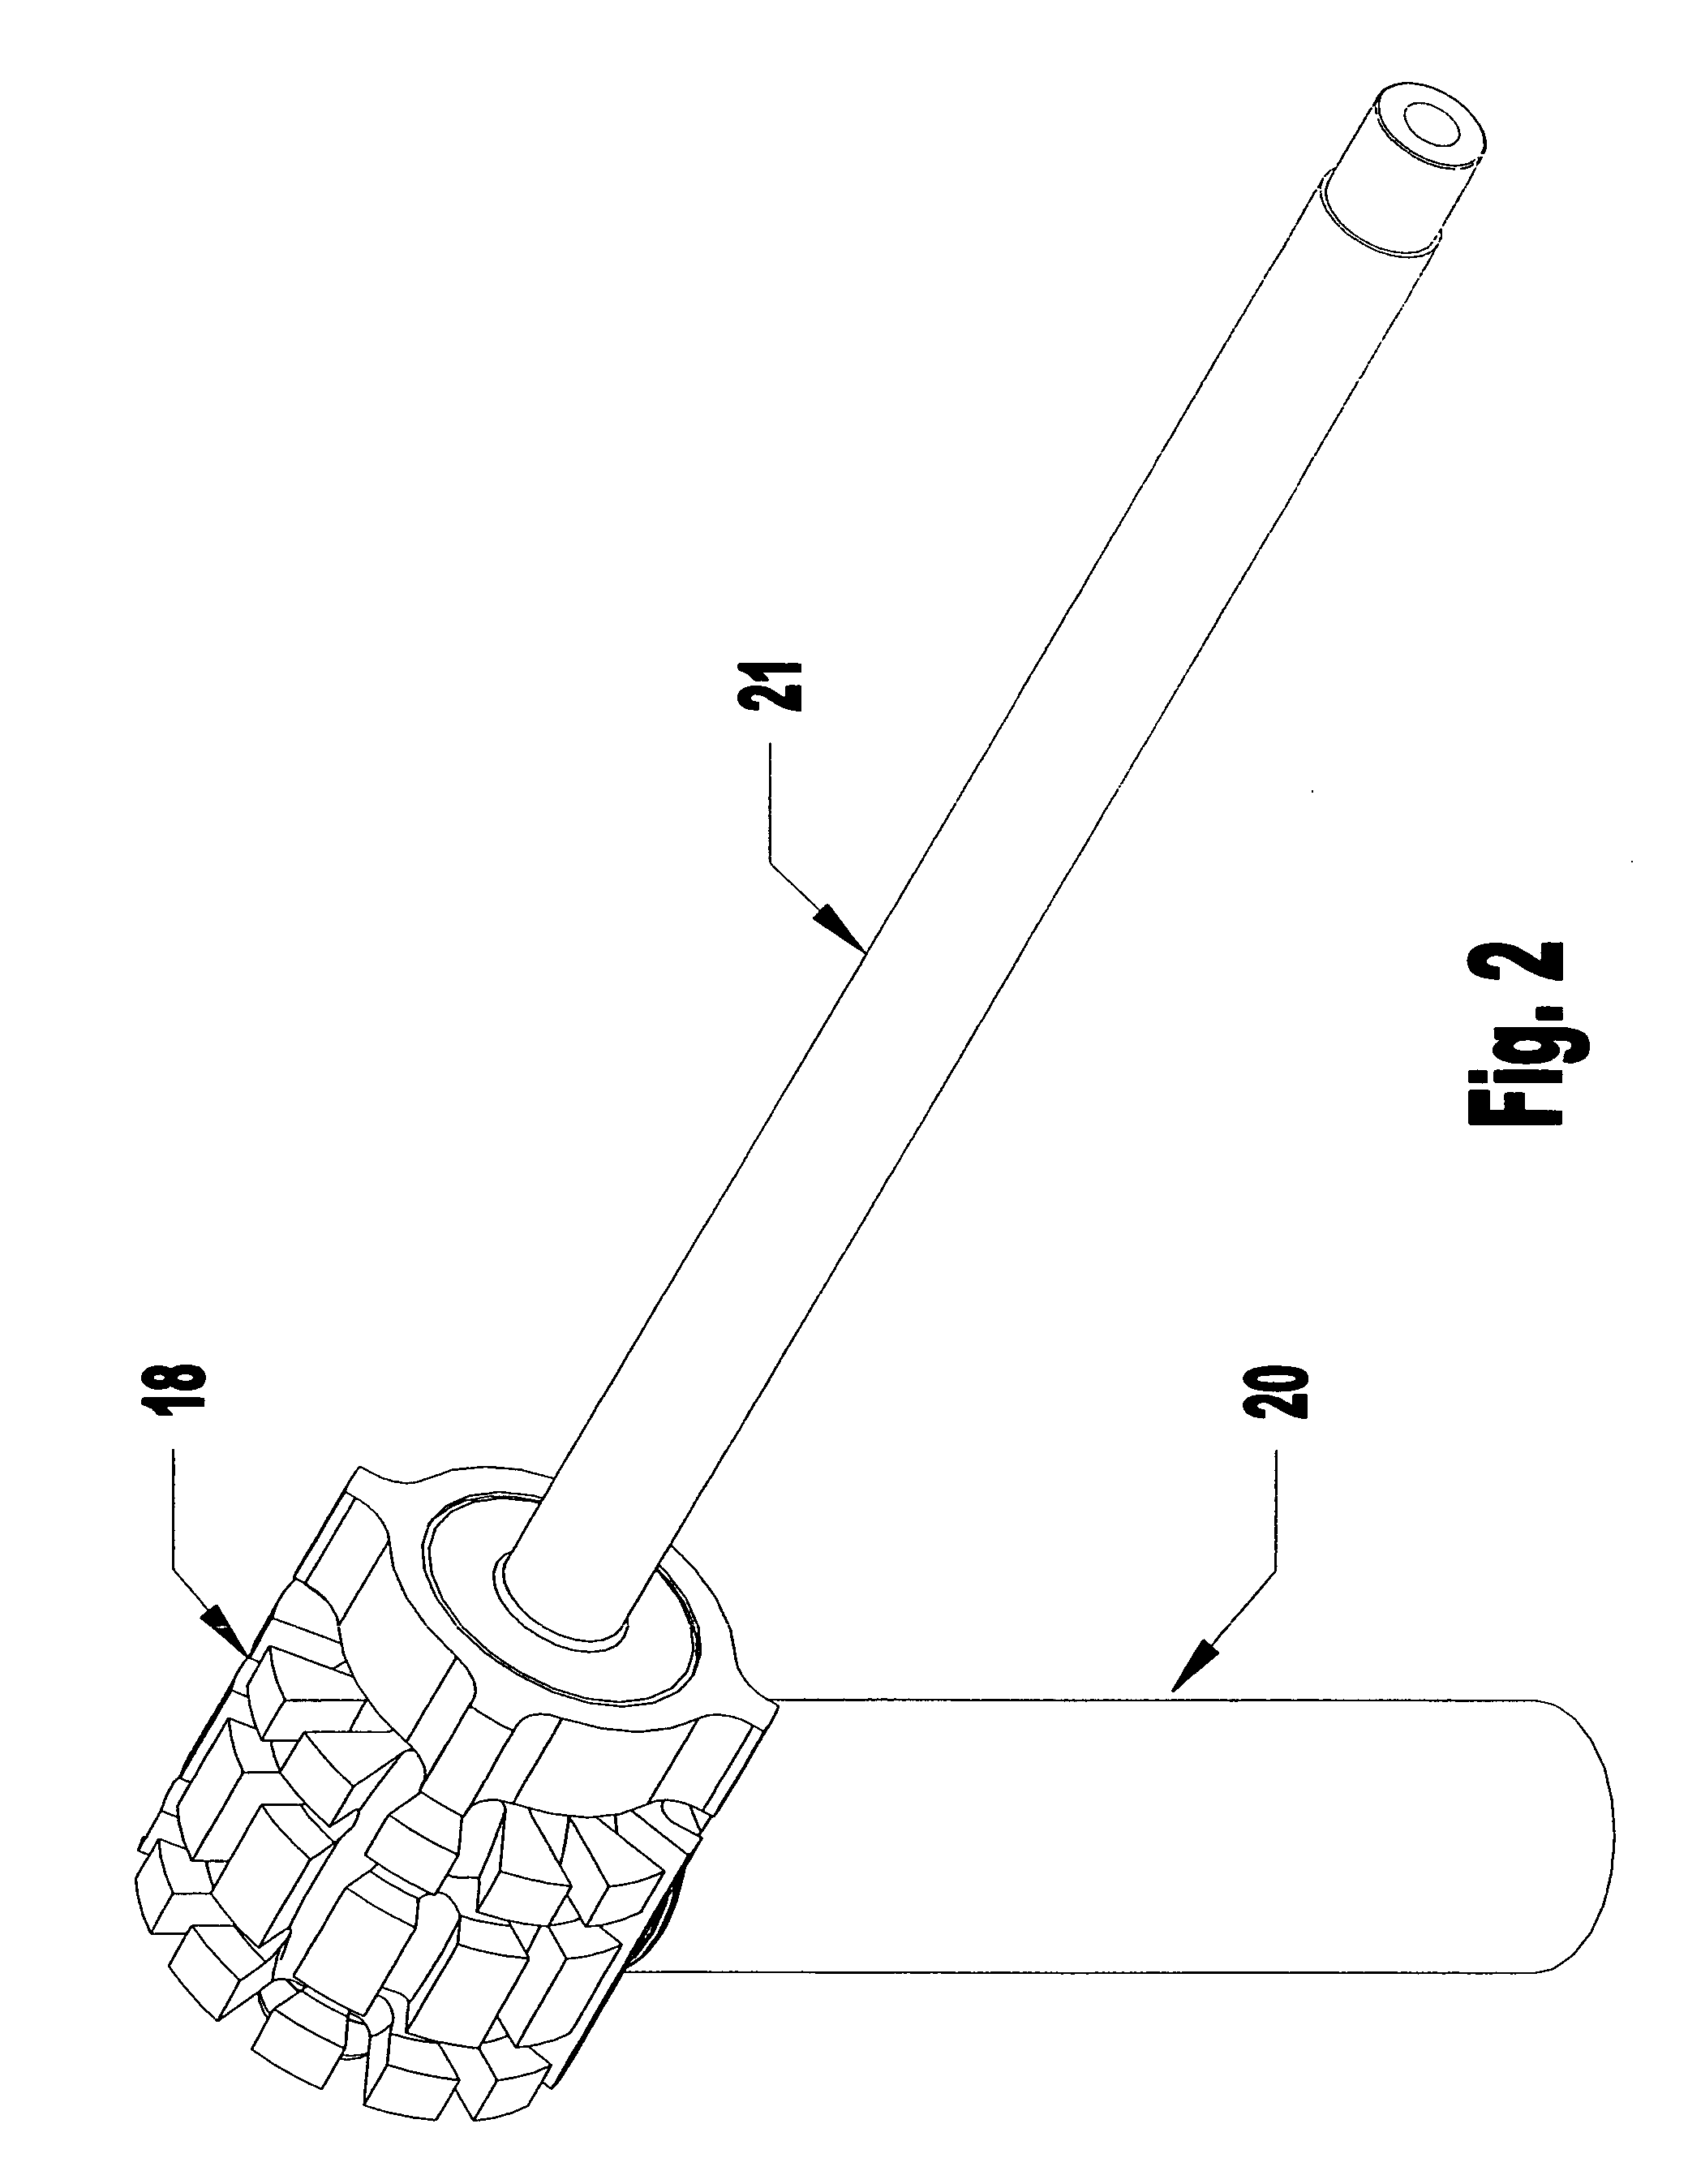 Combustion head for use with a flame spray apparatus